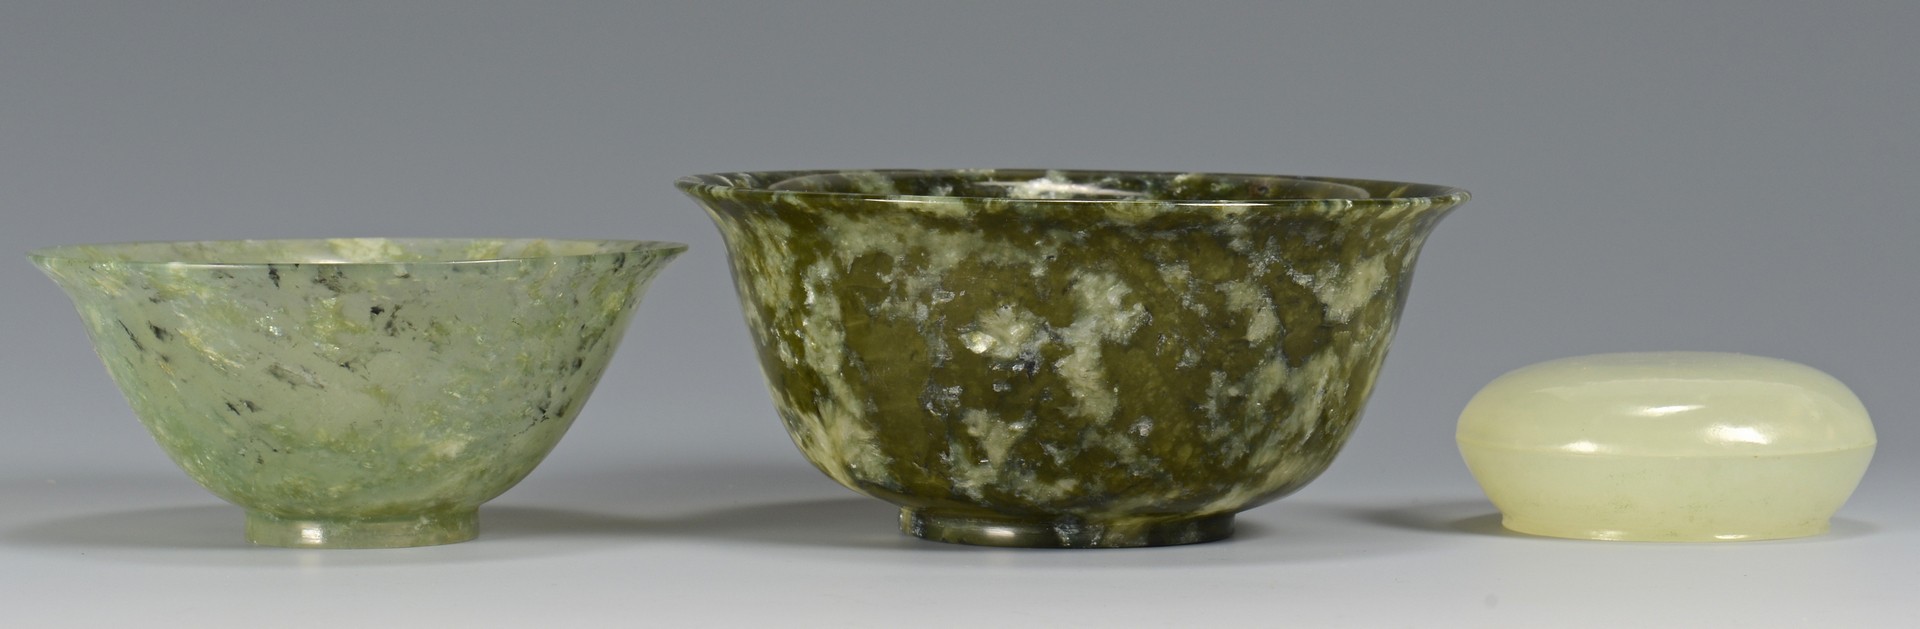 Lot 722: 2 carved jade bowls and covered box